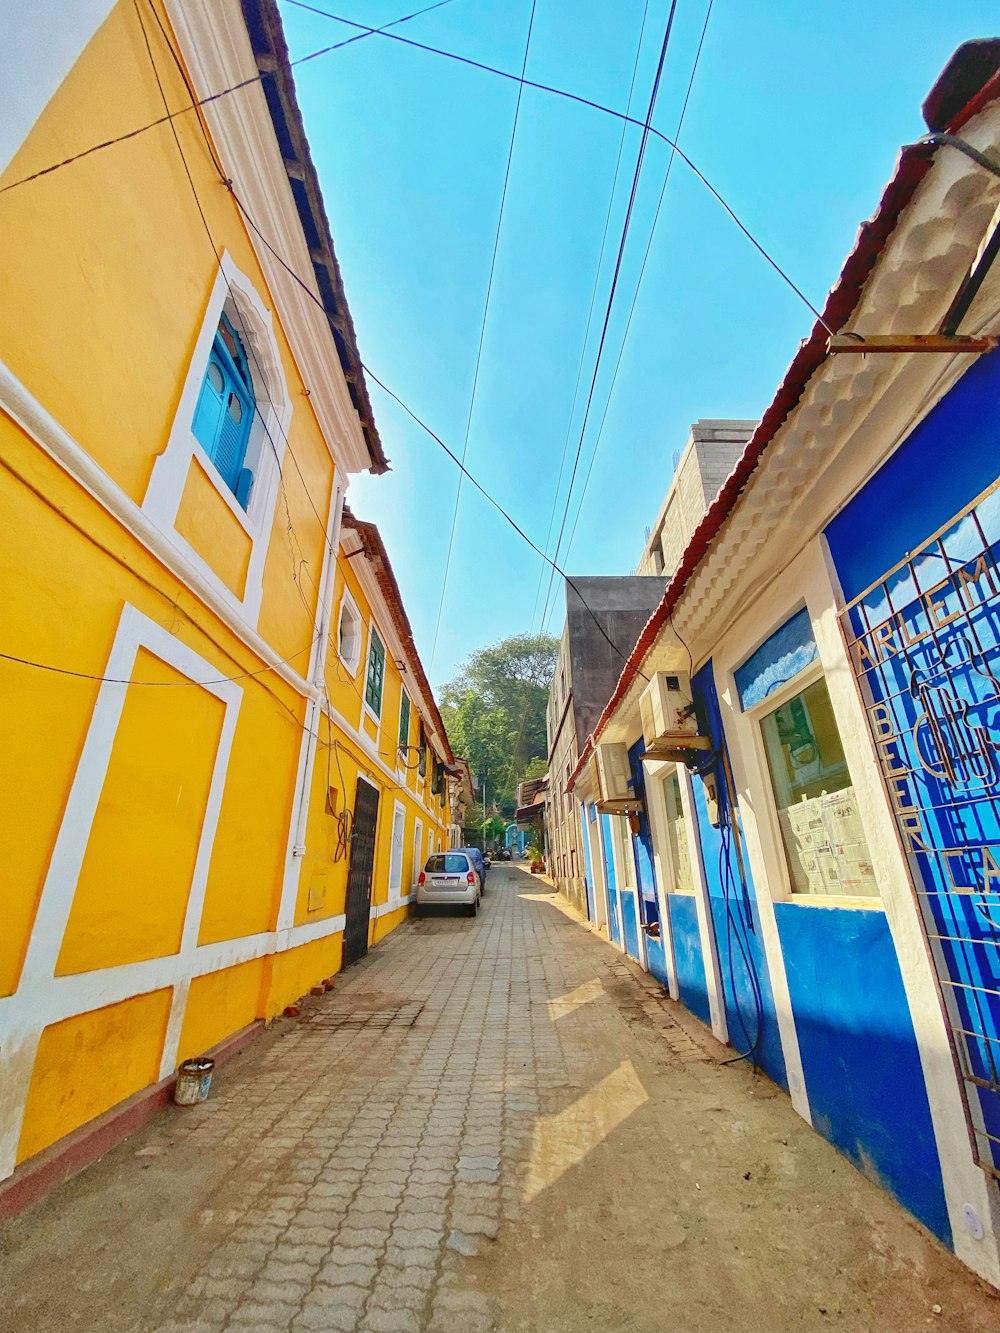 a narrow street with a yellow building and blue windows